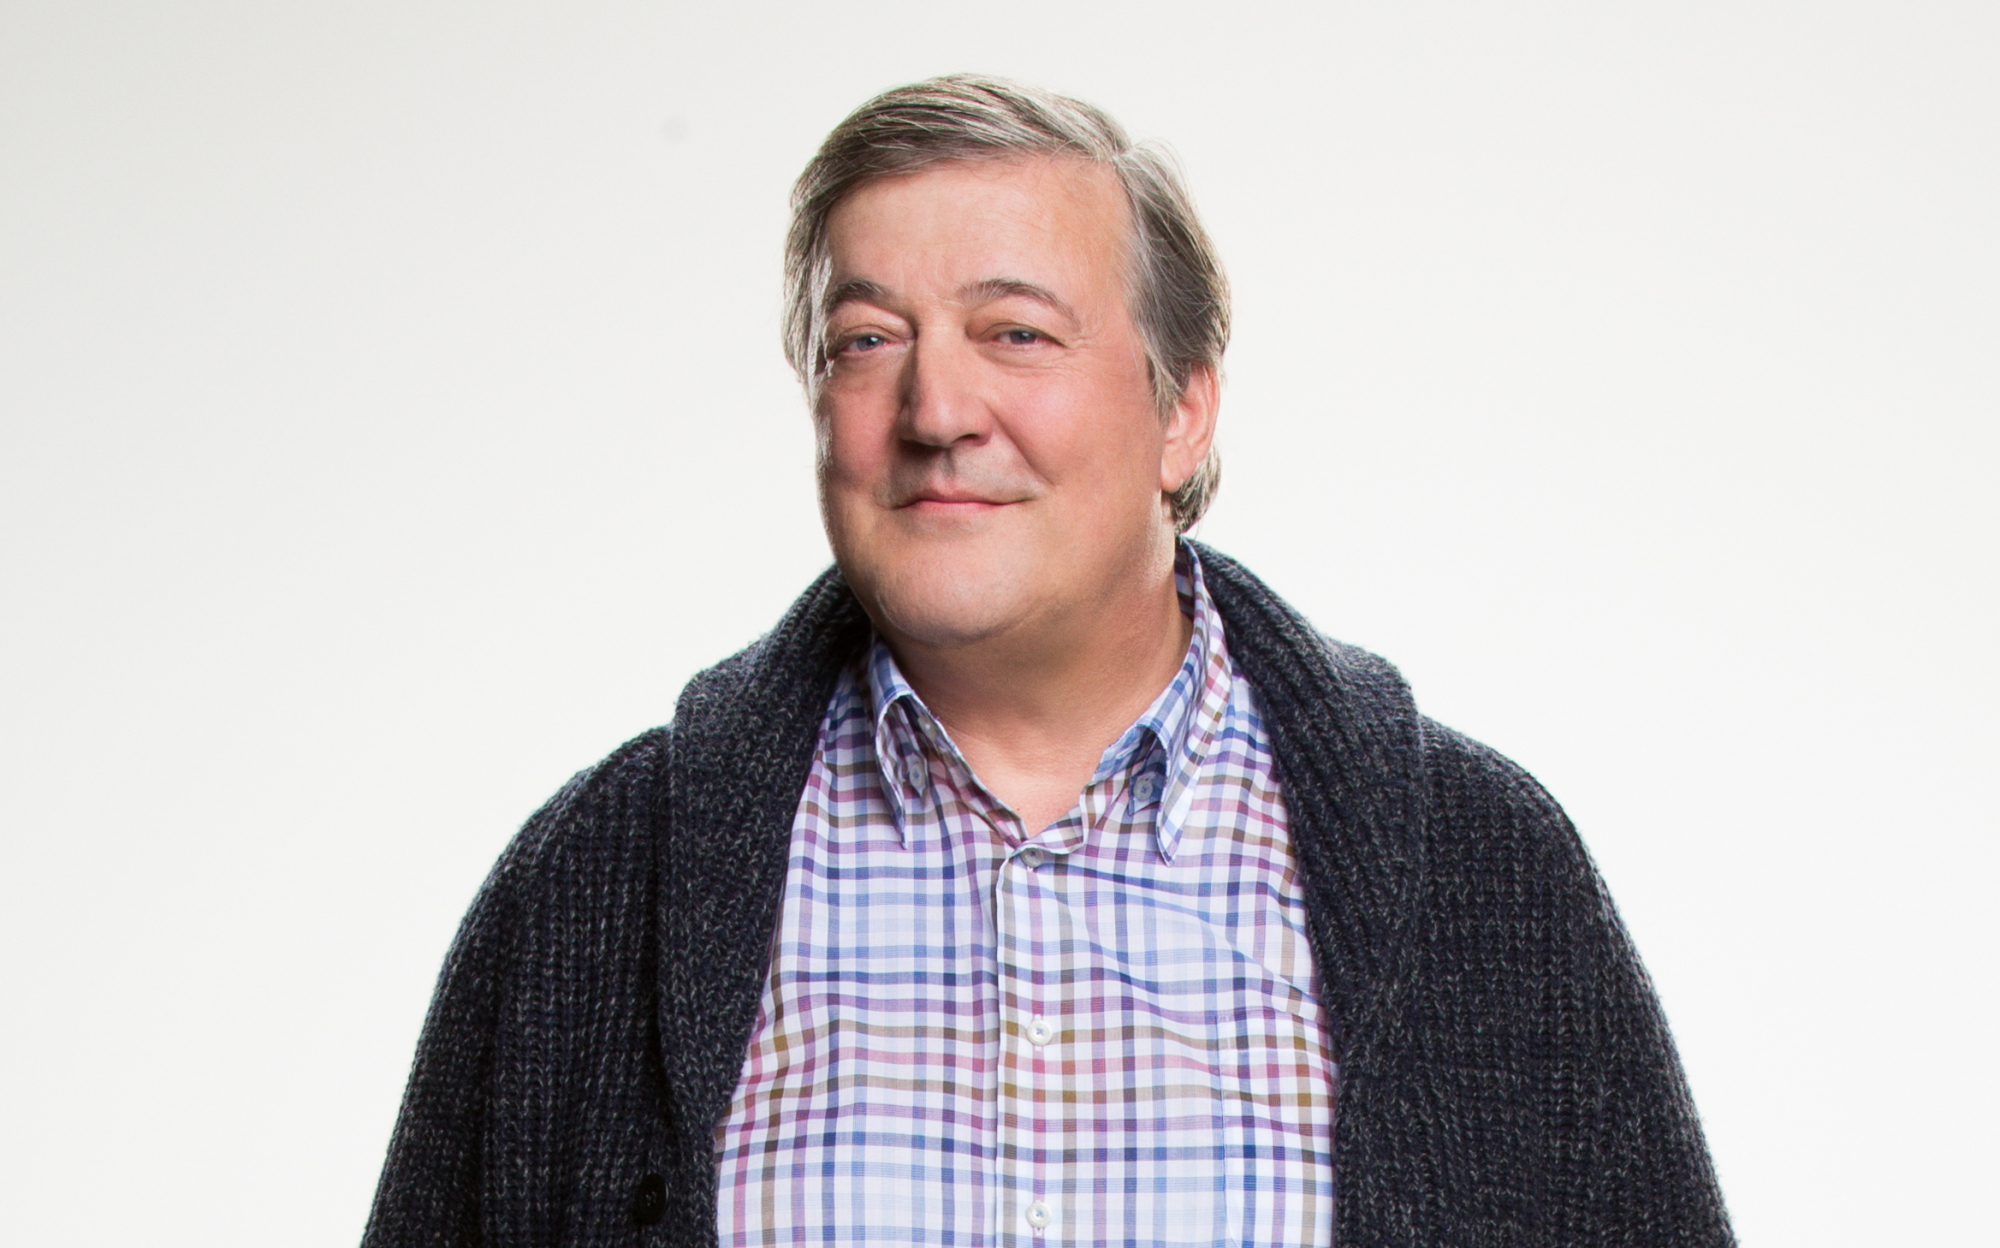 Stephen Fry als Roland in "The Great Indoors" am 18. April 2016. | Quelle: Getty Images